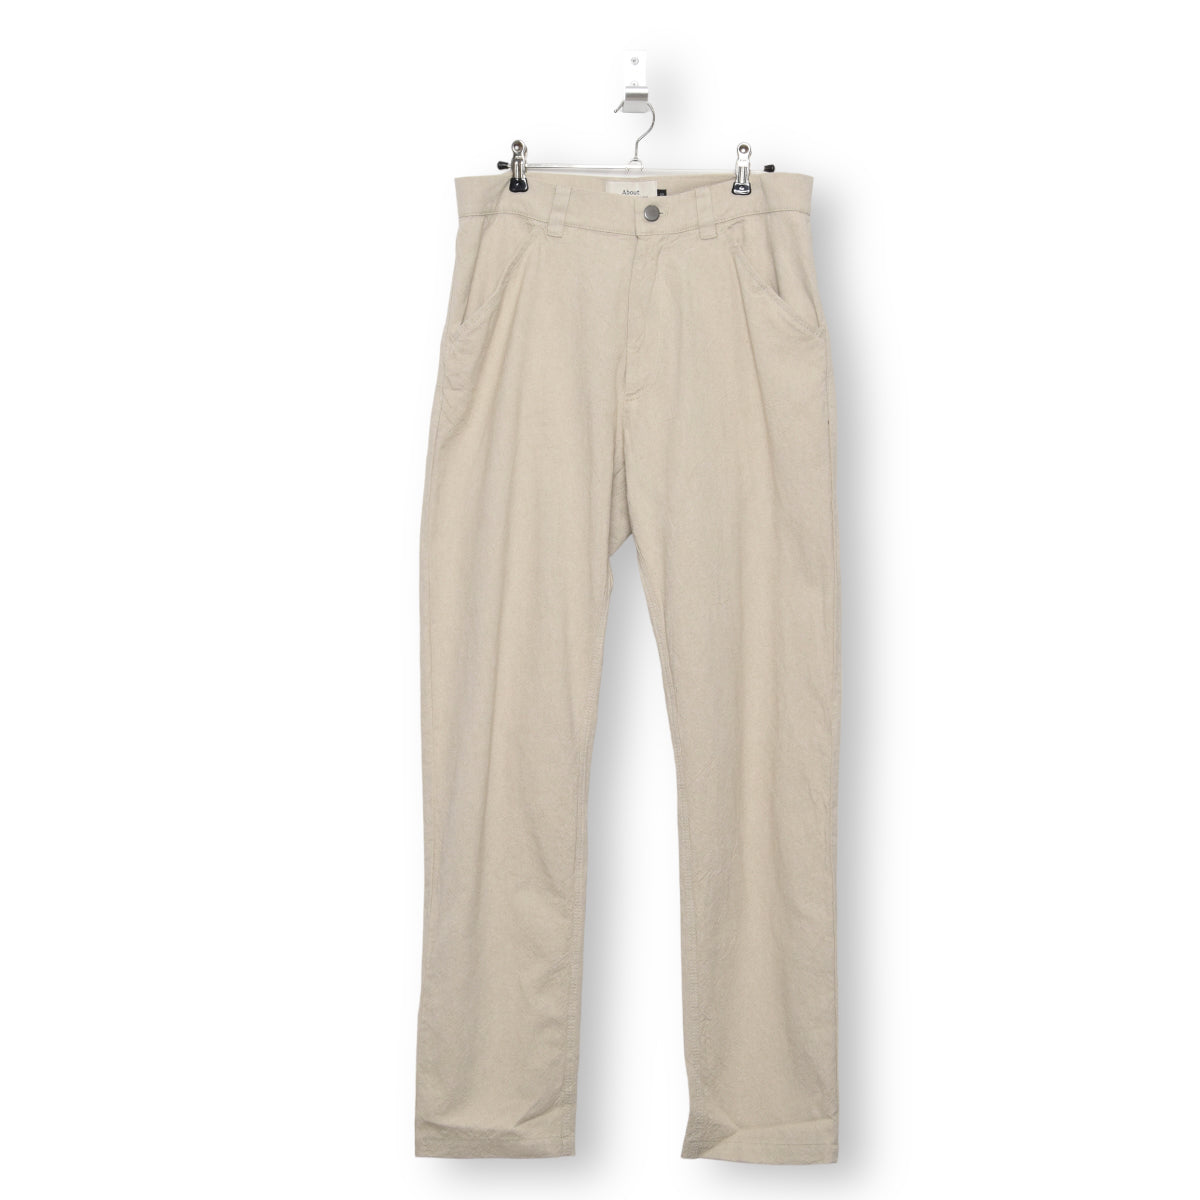 About Companions Olf trousers eco canvas sand